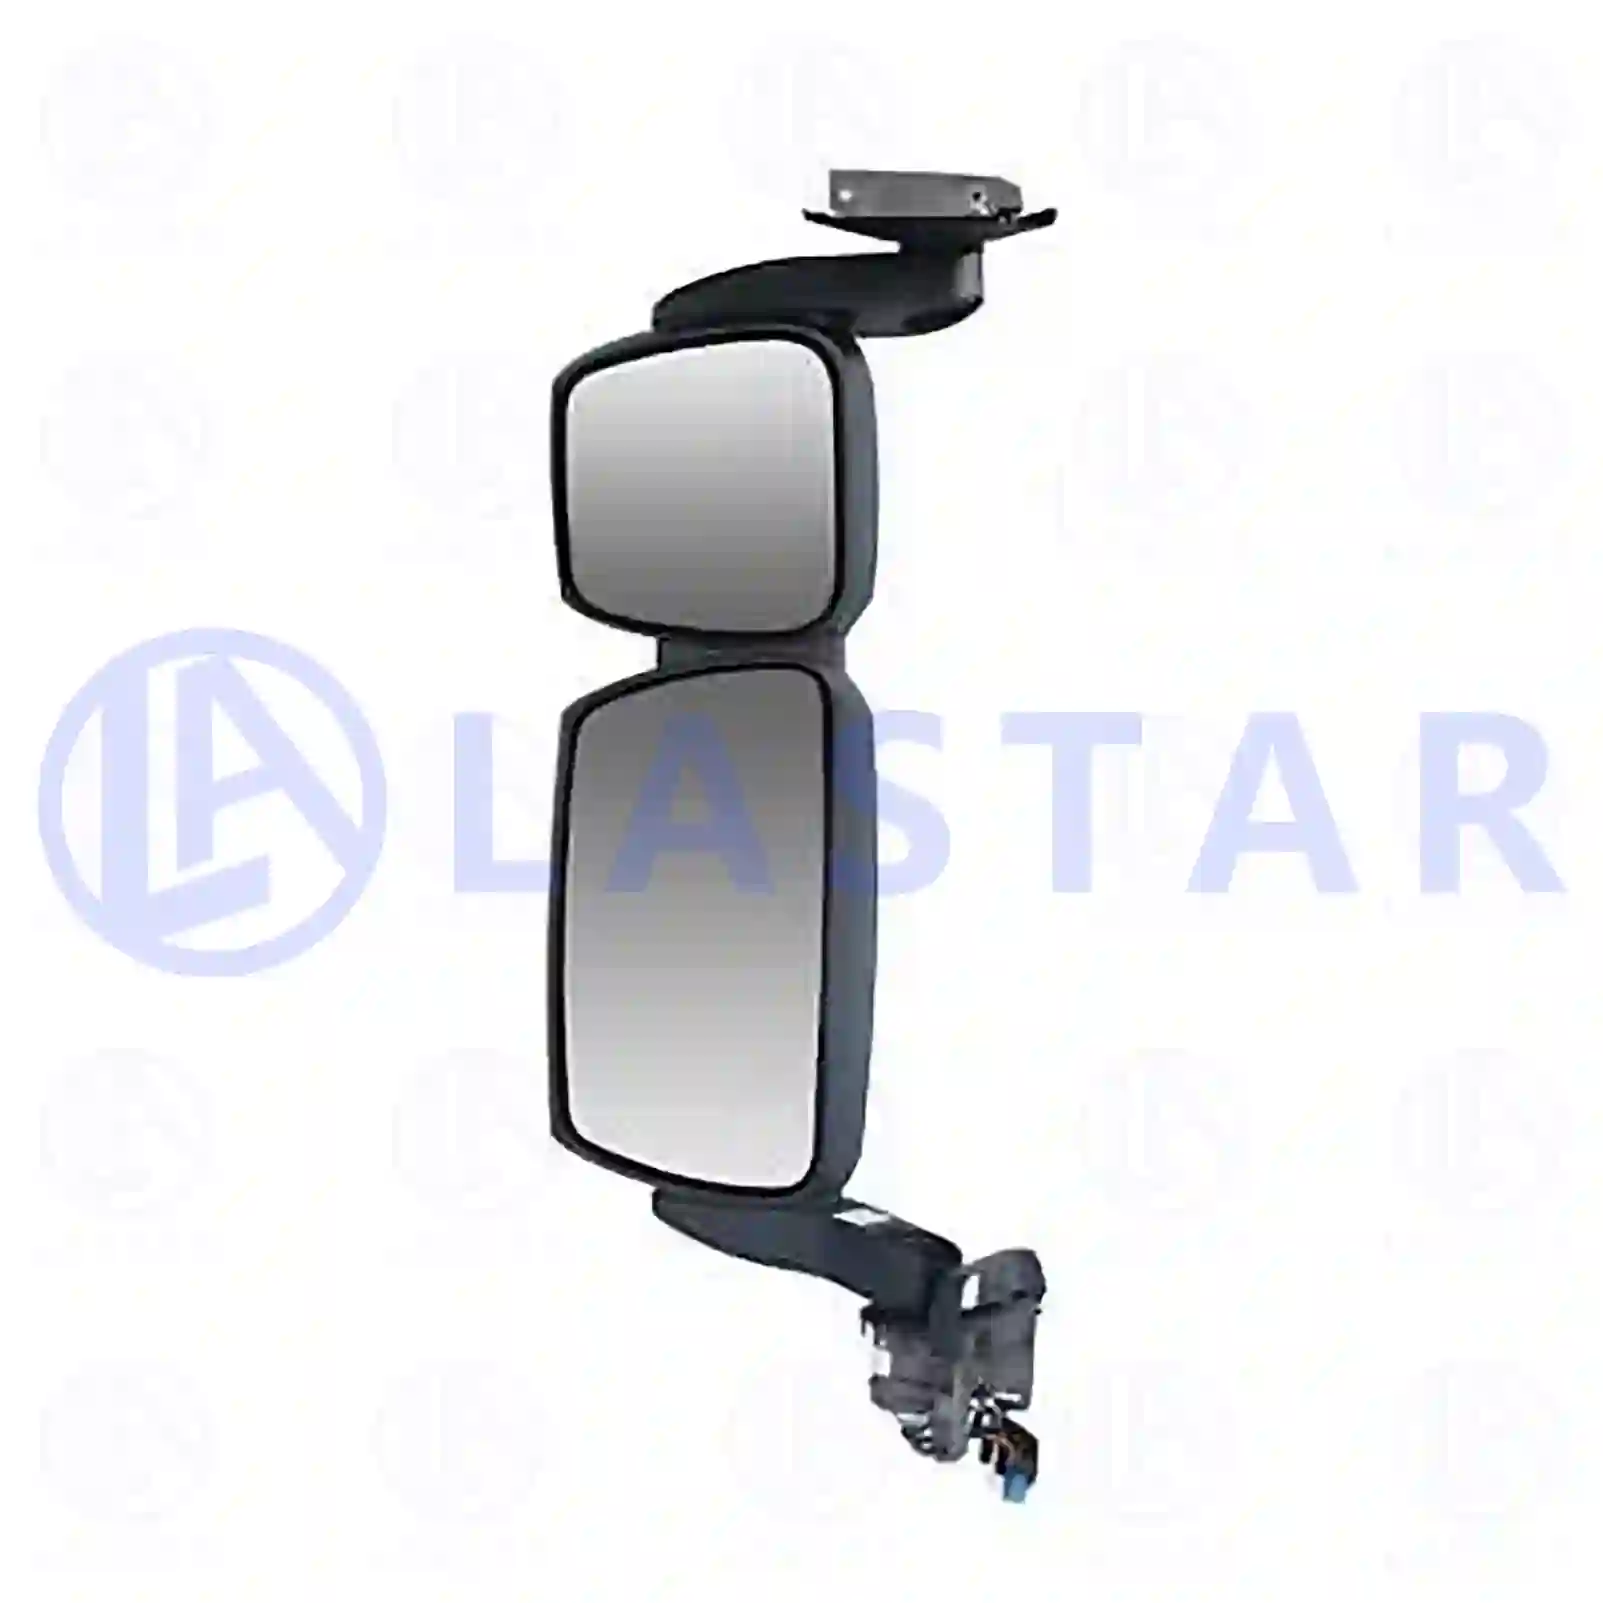 Main mirror, complete, left, heated, 77718663, 504150524, 504369909, 5801334600 ||  77718663 Lastar Spare Part | Truck Spare Parts, Auotomotive Spare Parts Main mirror, complete, left, heated, 77718663, 504150524, 504369909, 5801334600 ||  77718663 Lastar Spare Part | Truck Spare Parts, Auotomotive Spare Parts